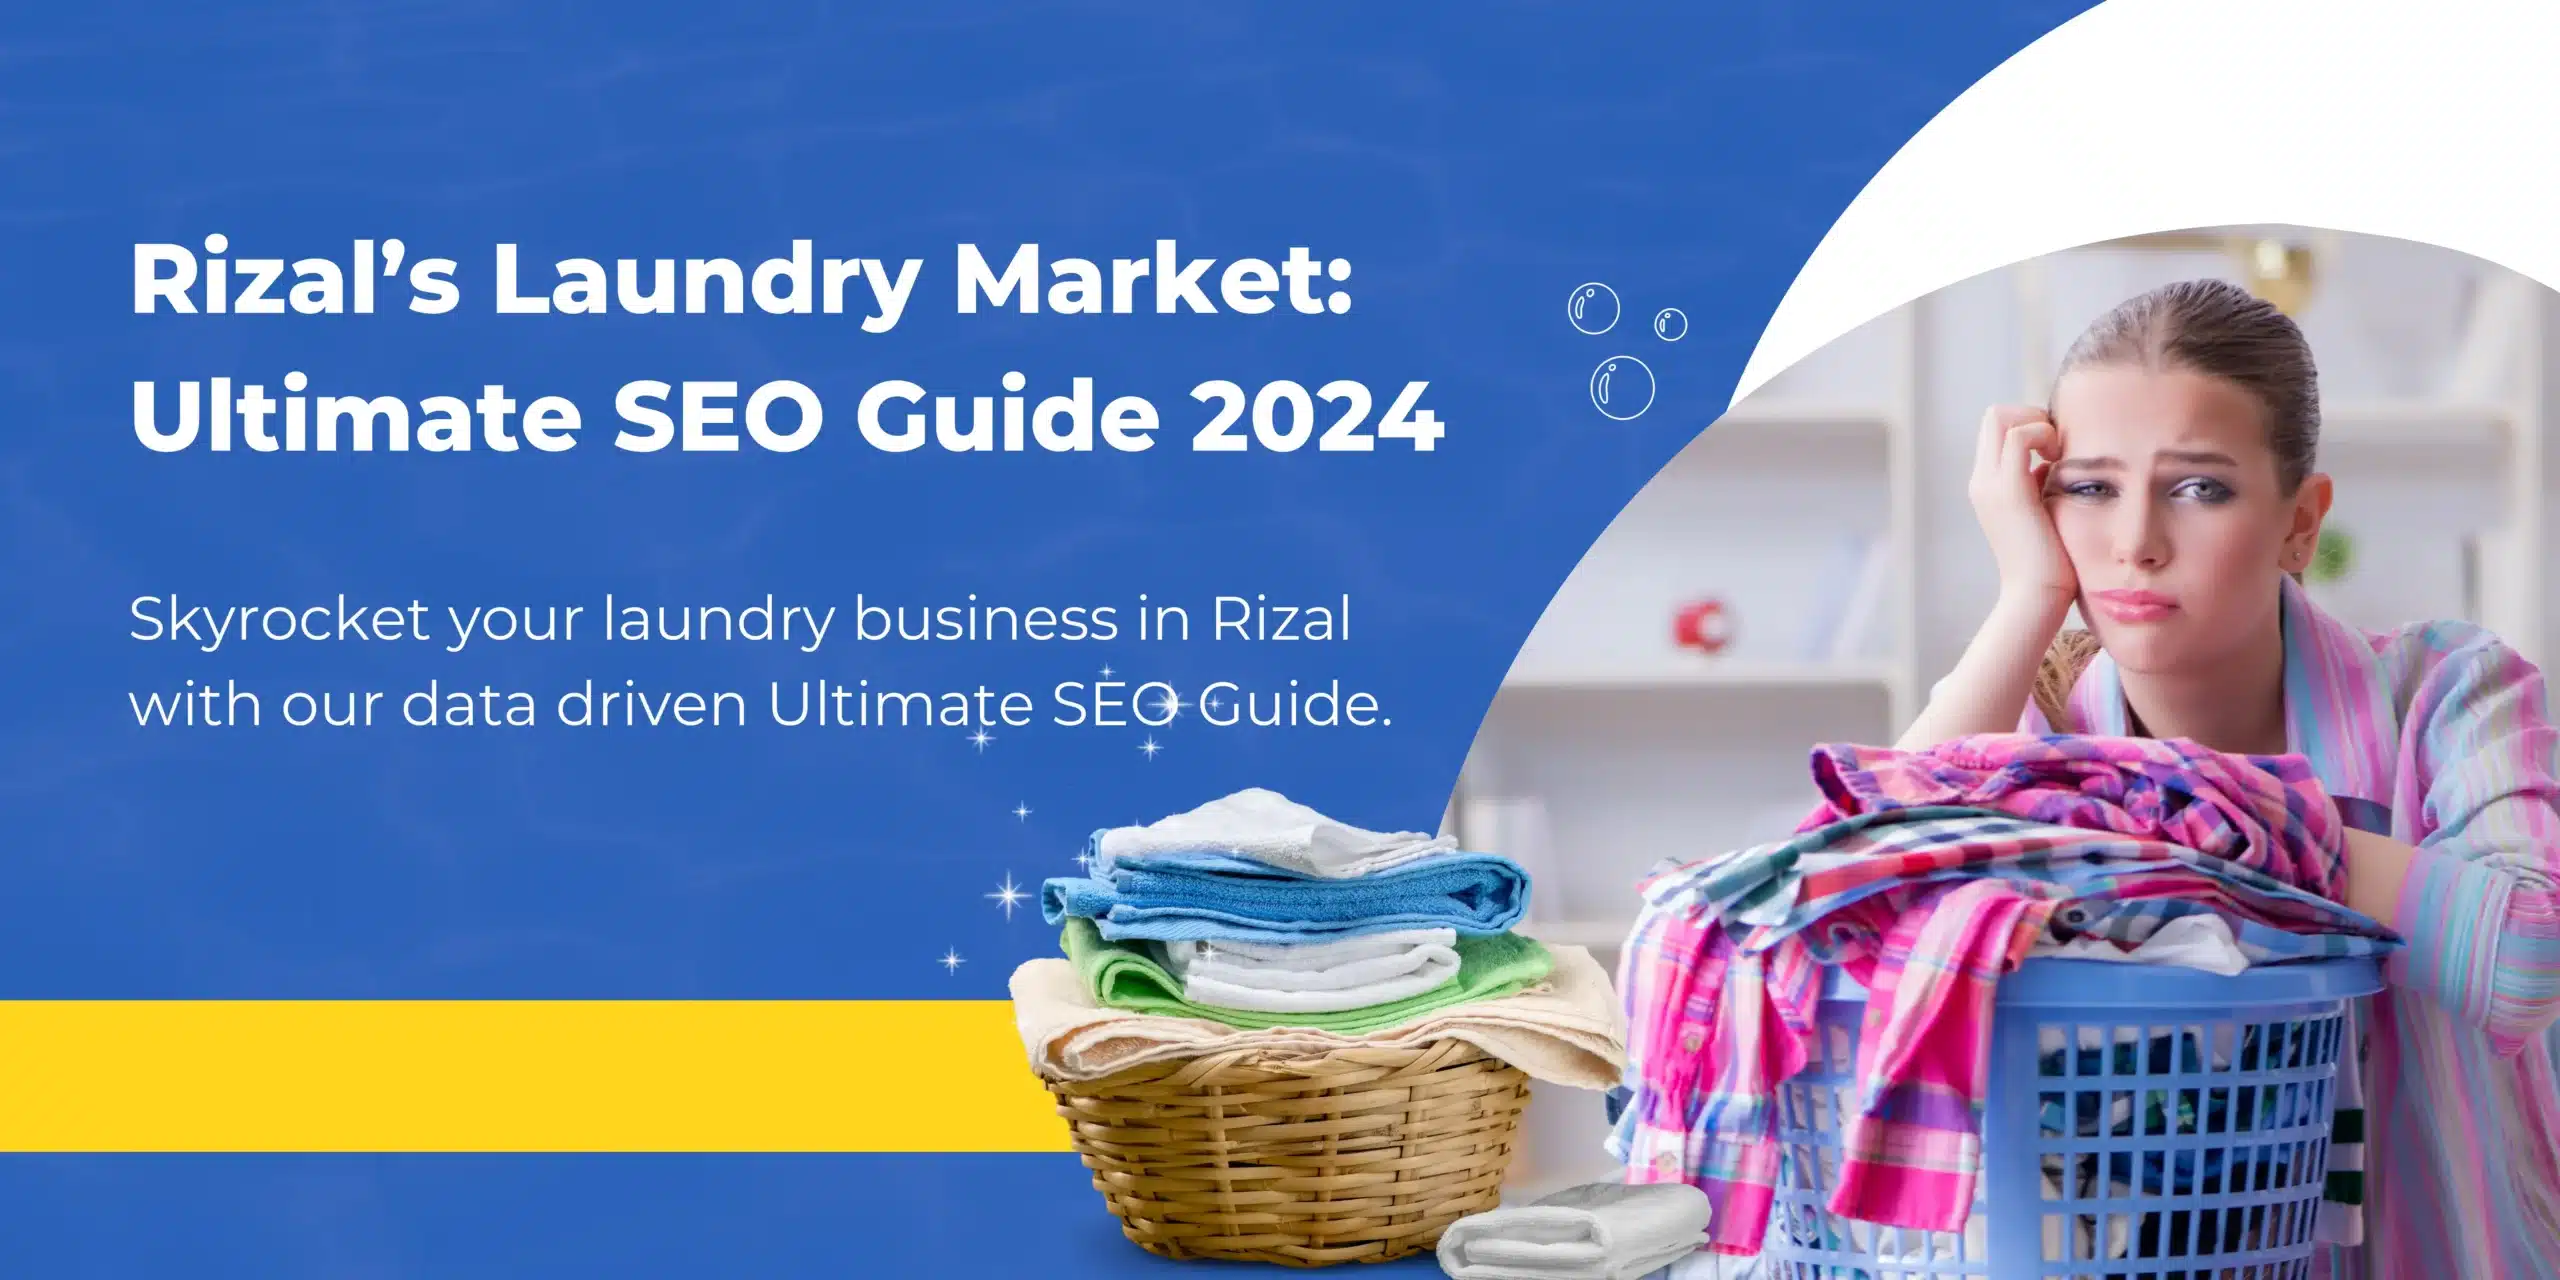 Dominate Rizal's Laundry Market in 2024: The Ultimate SEO Guide